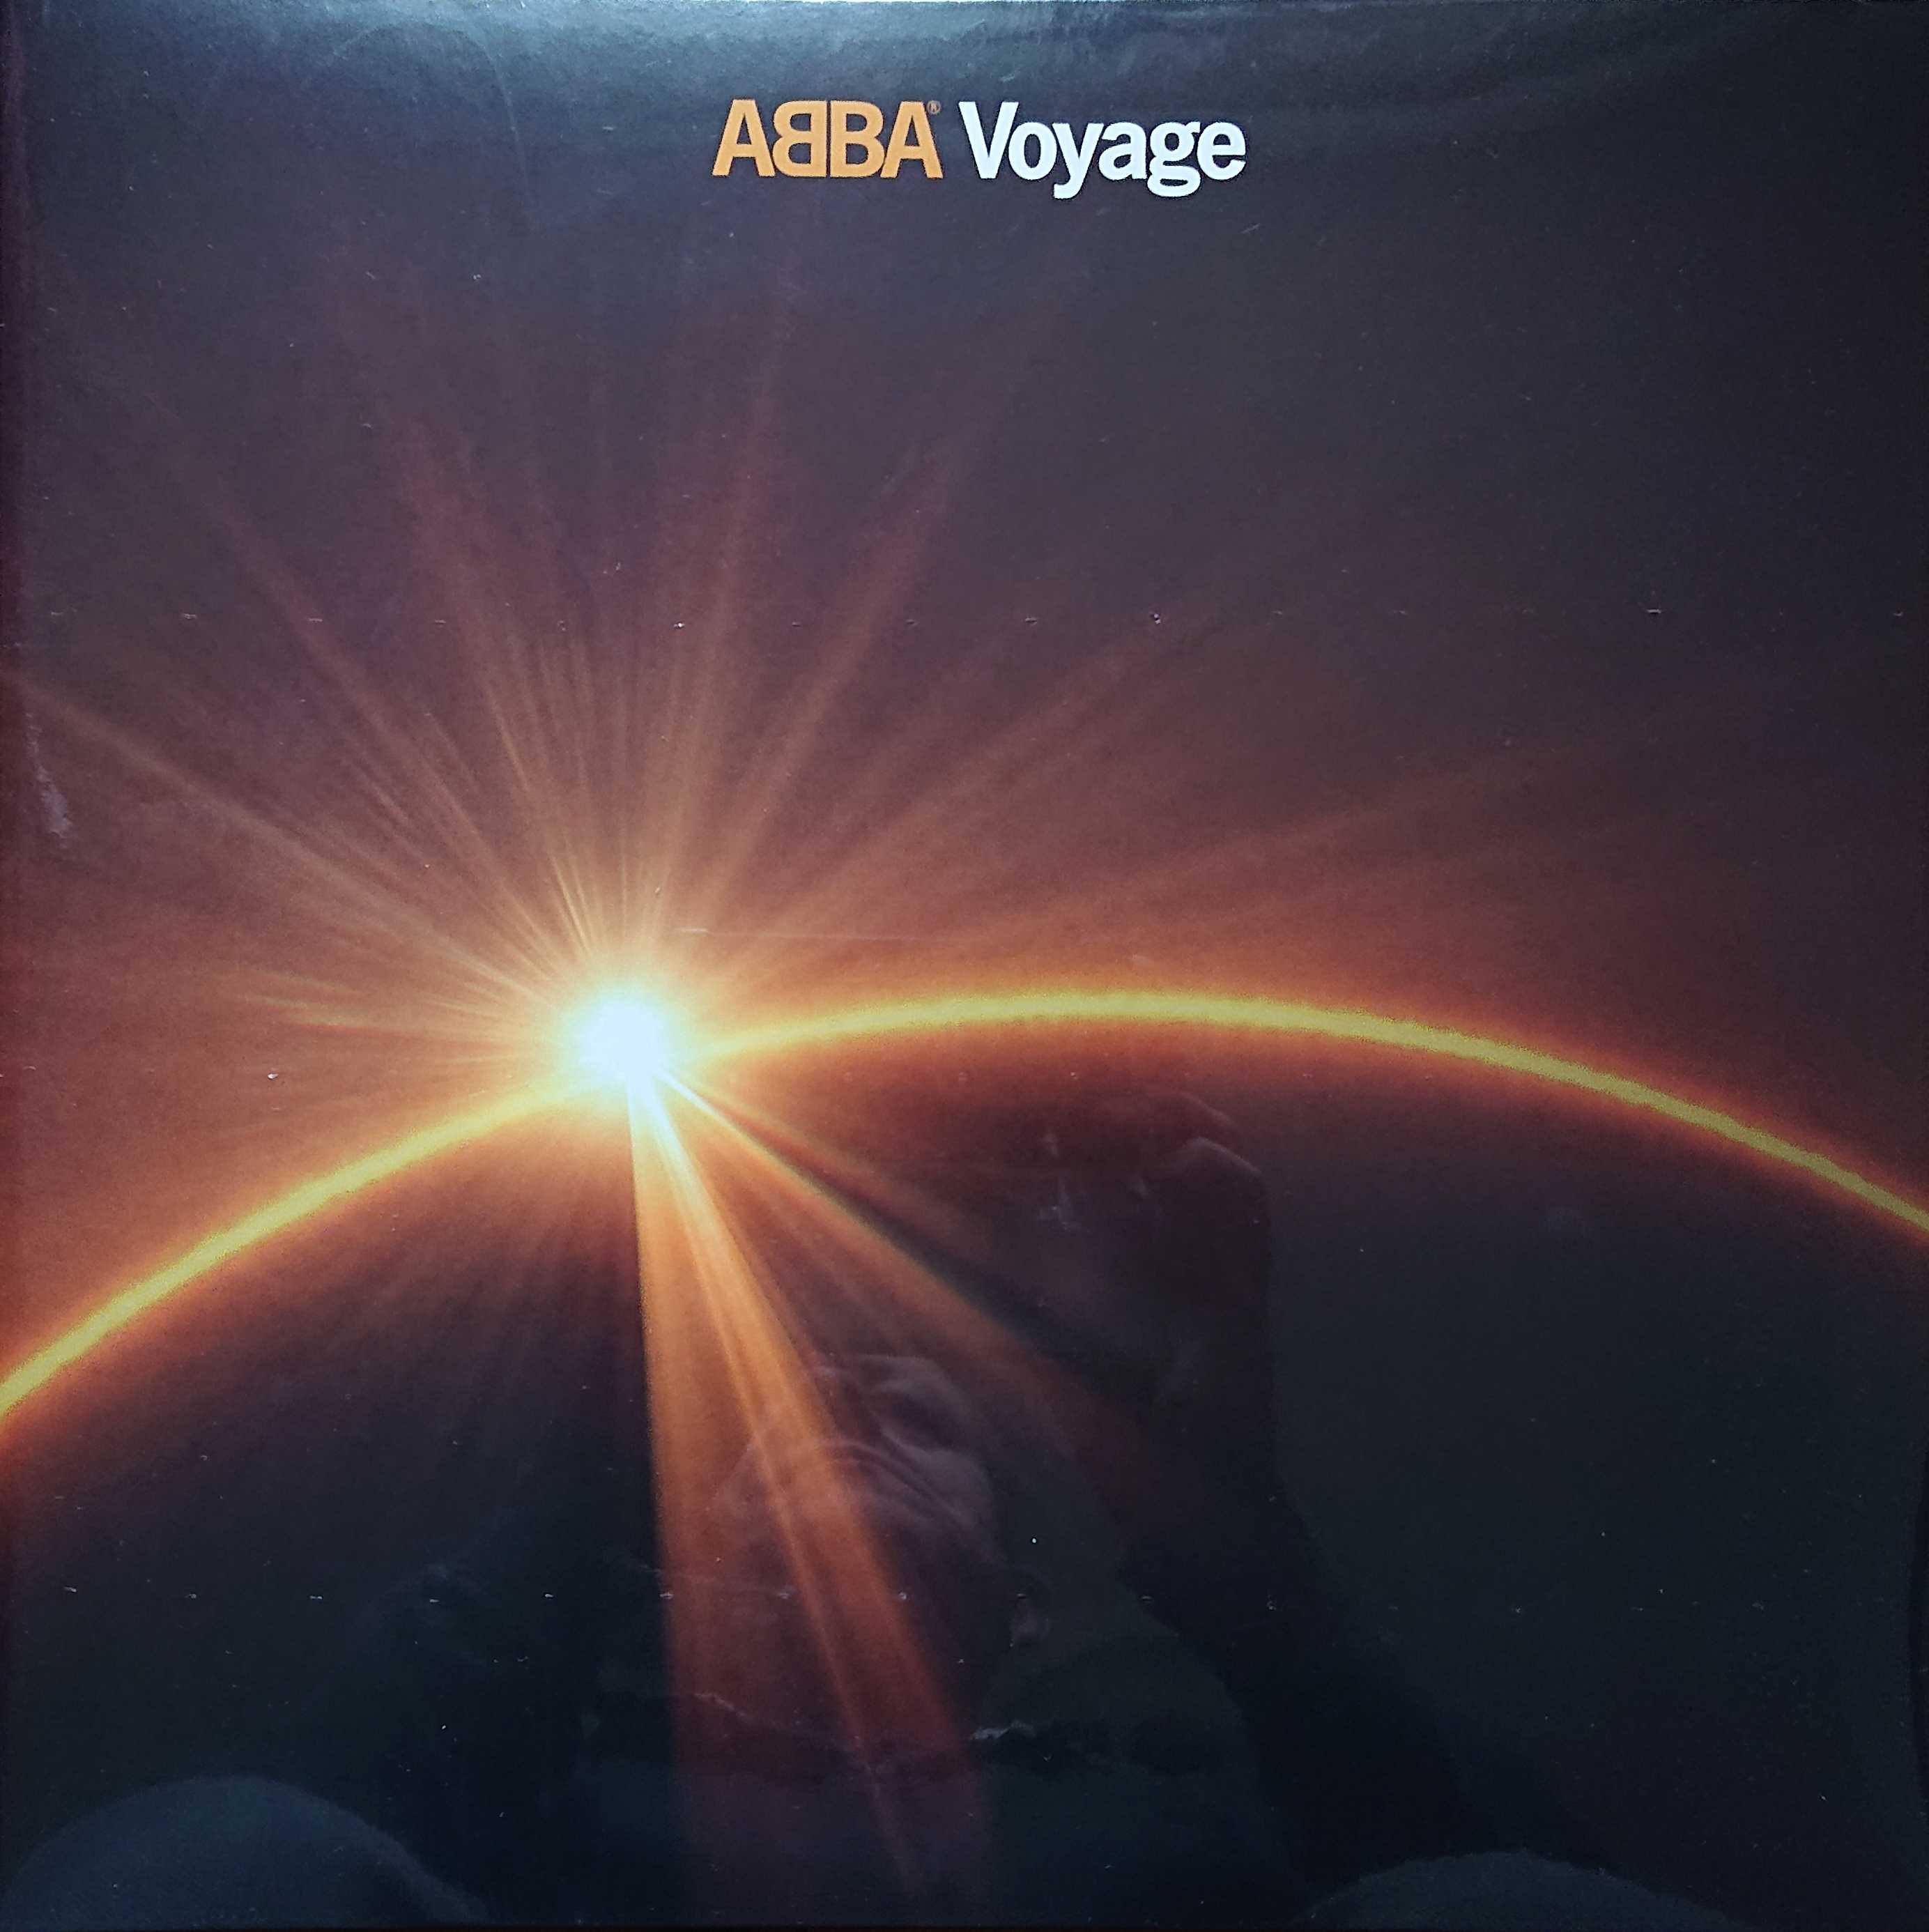 Picture of Voyage by artist Abba 